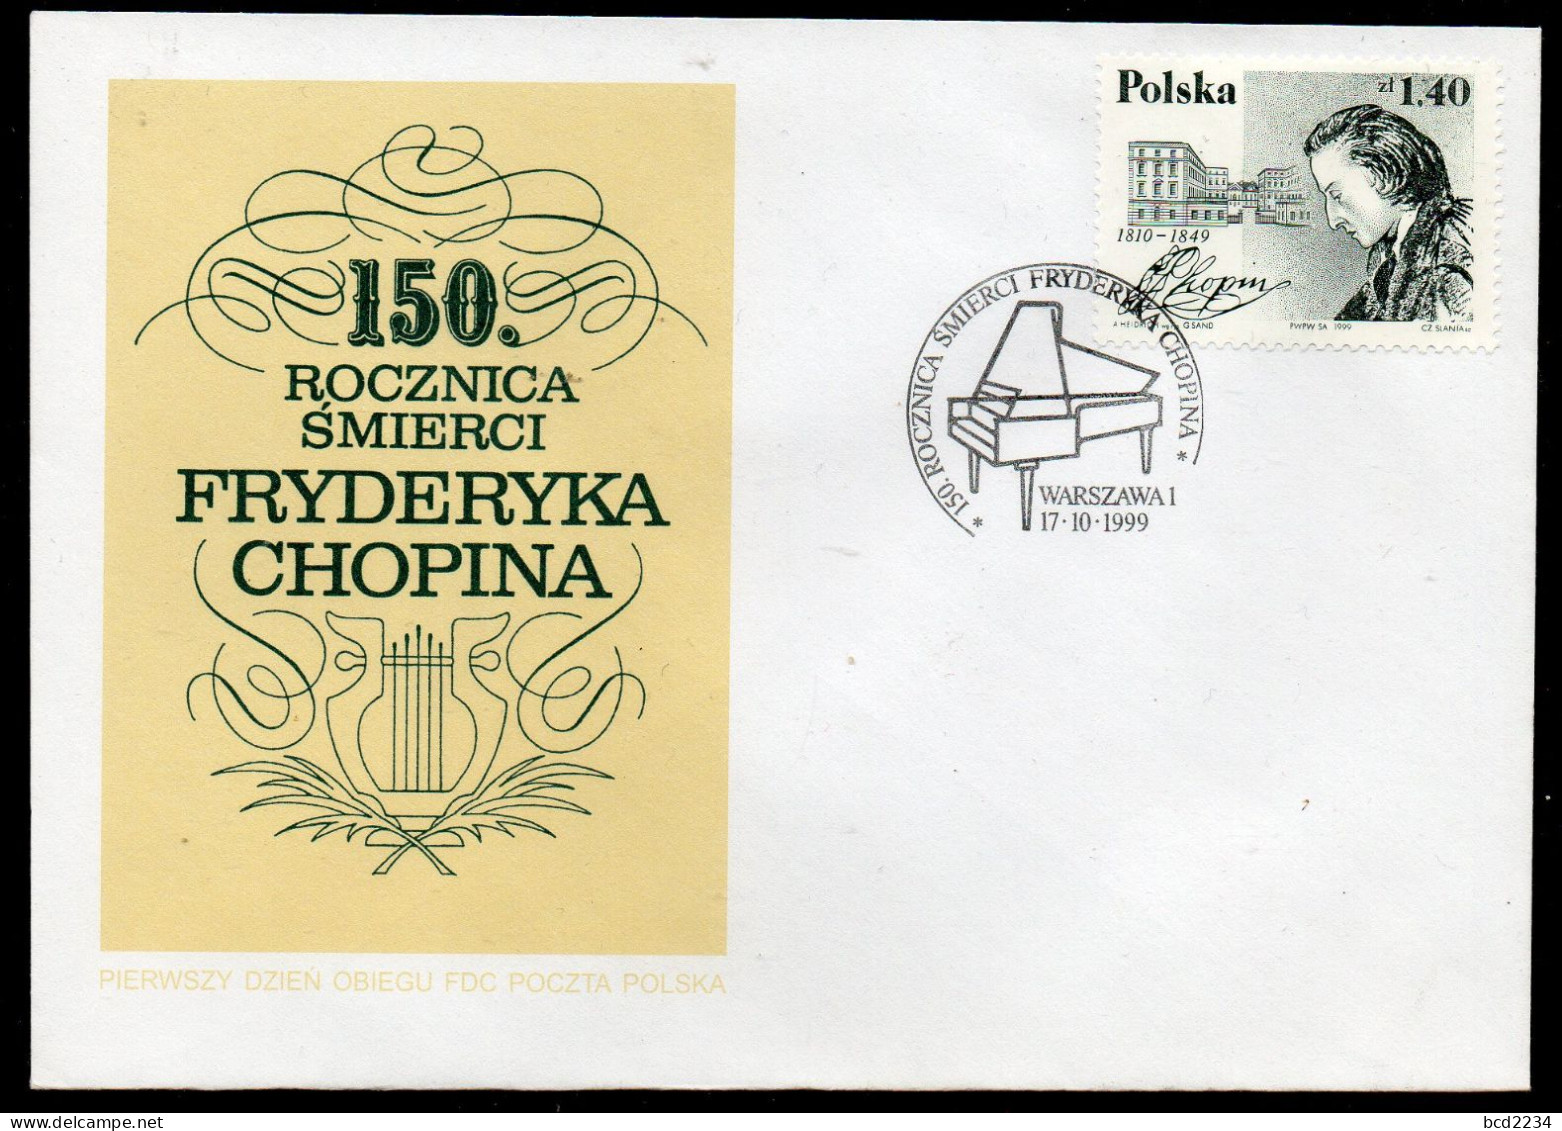 POLAND FRANCE SLANIA 1999 CHOPIN JOINT ISSUE FDC 150TH DEATH ANNIVERSARY COMPOSERS MUSIC PIANO POLISH FRENCH - Storia Postale